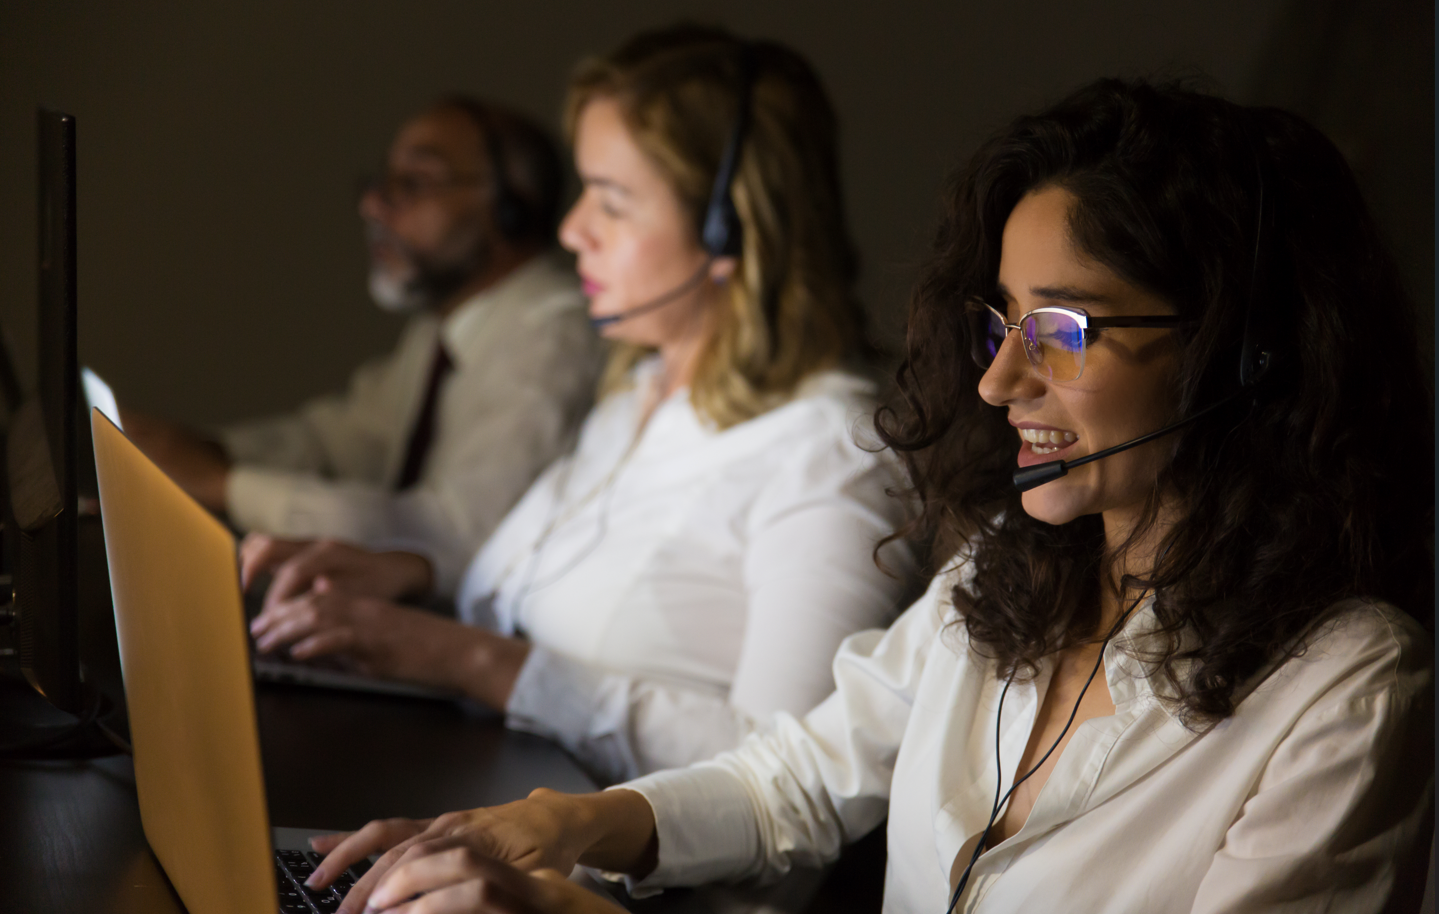 improve your customer support can help boost customer LTV